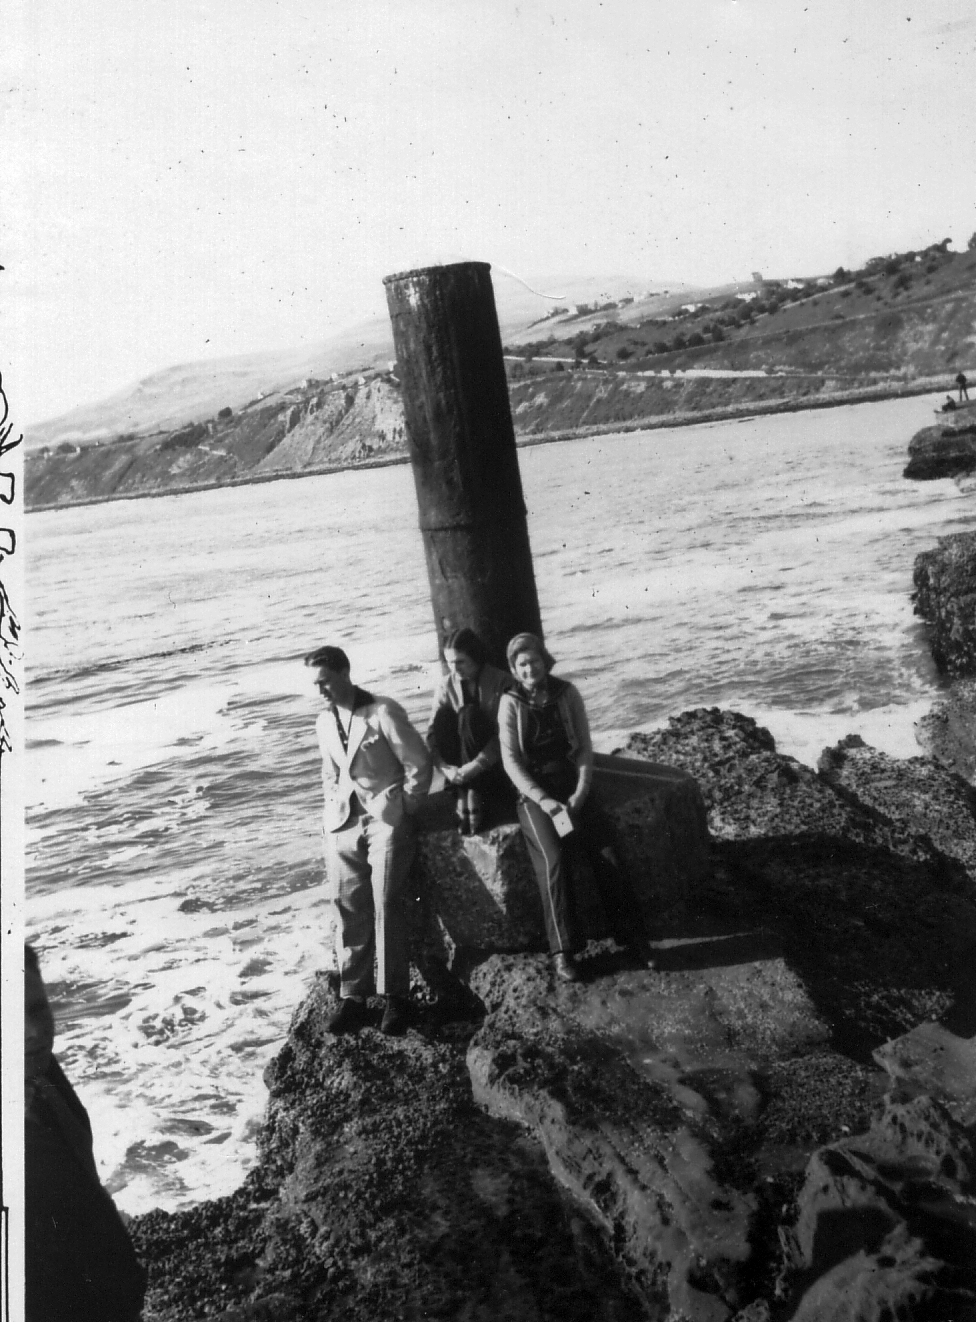 Well dressed and hanging out at the ocean, possibly around Malibu, 1930's. From my grandmother's collection. View full size.